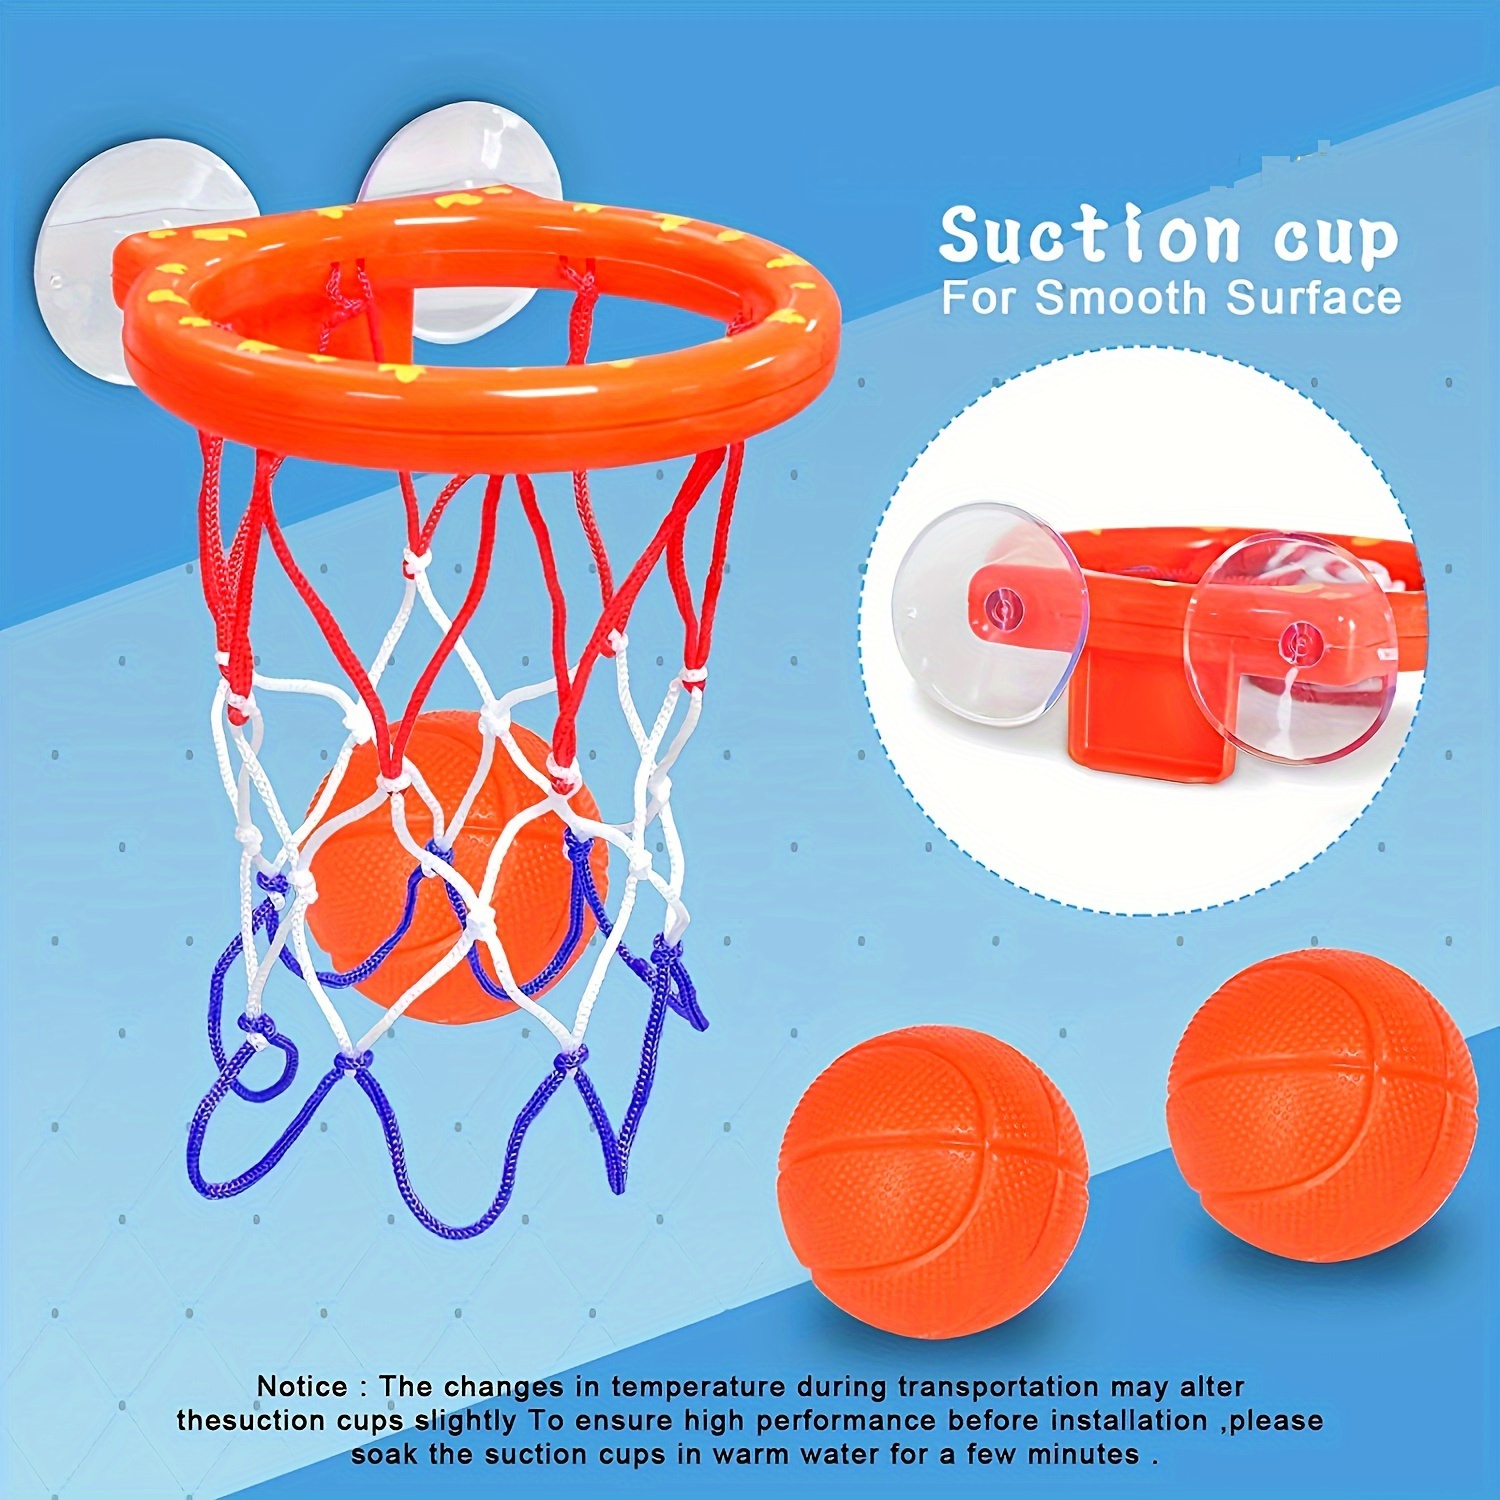 Fun Basketball Hoop And Ball Toys, Suitable For Kids' Bath Toys, Bathtub  Shooting Game 3 Ball Set And Strong Suction Cup, Can Be Used For Indoor And  O